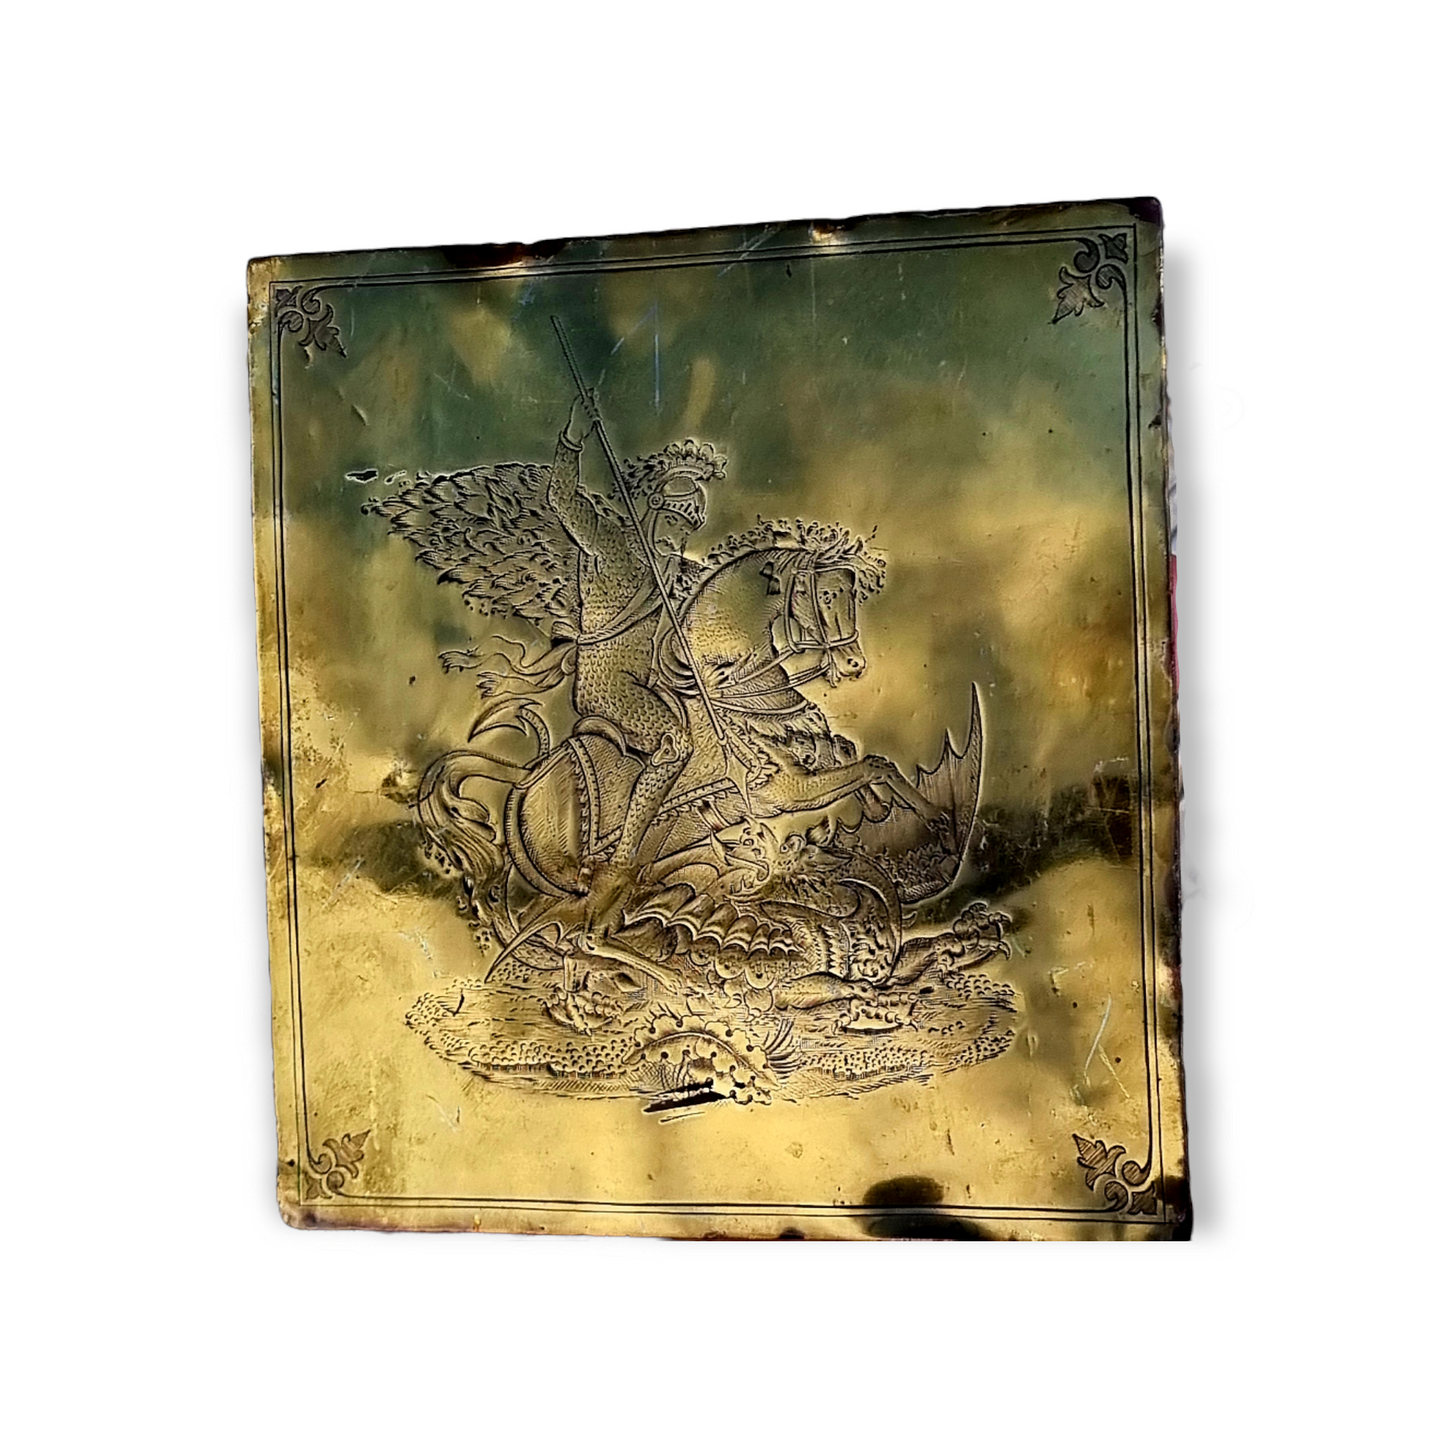 19th Century English Antique Brass Plaque Engraved With Saint George Slaying The Dragon